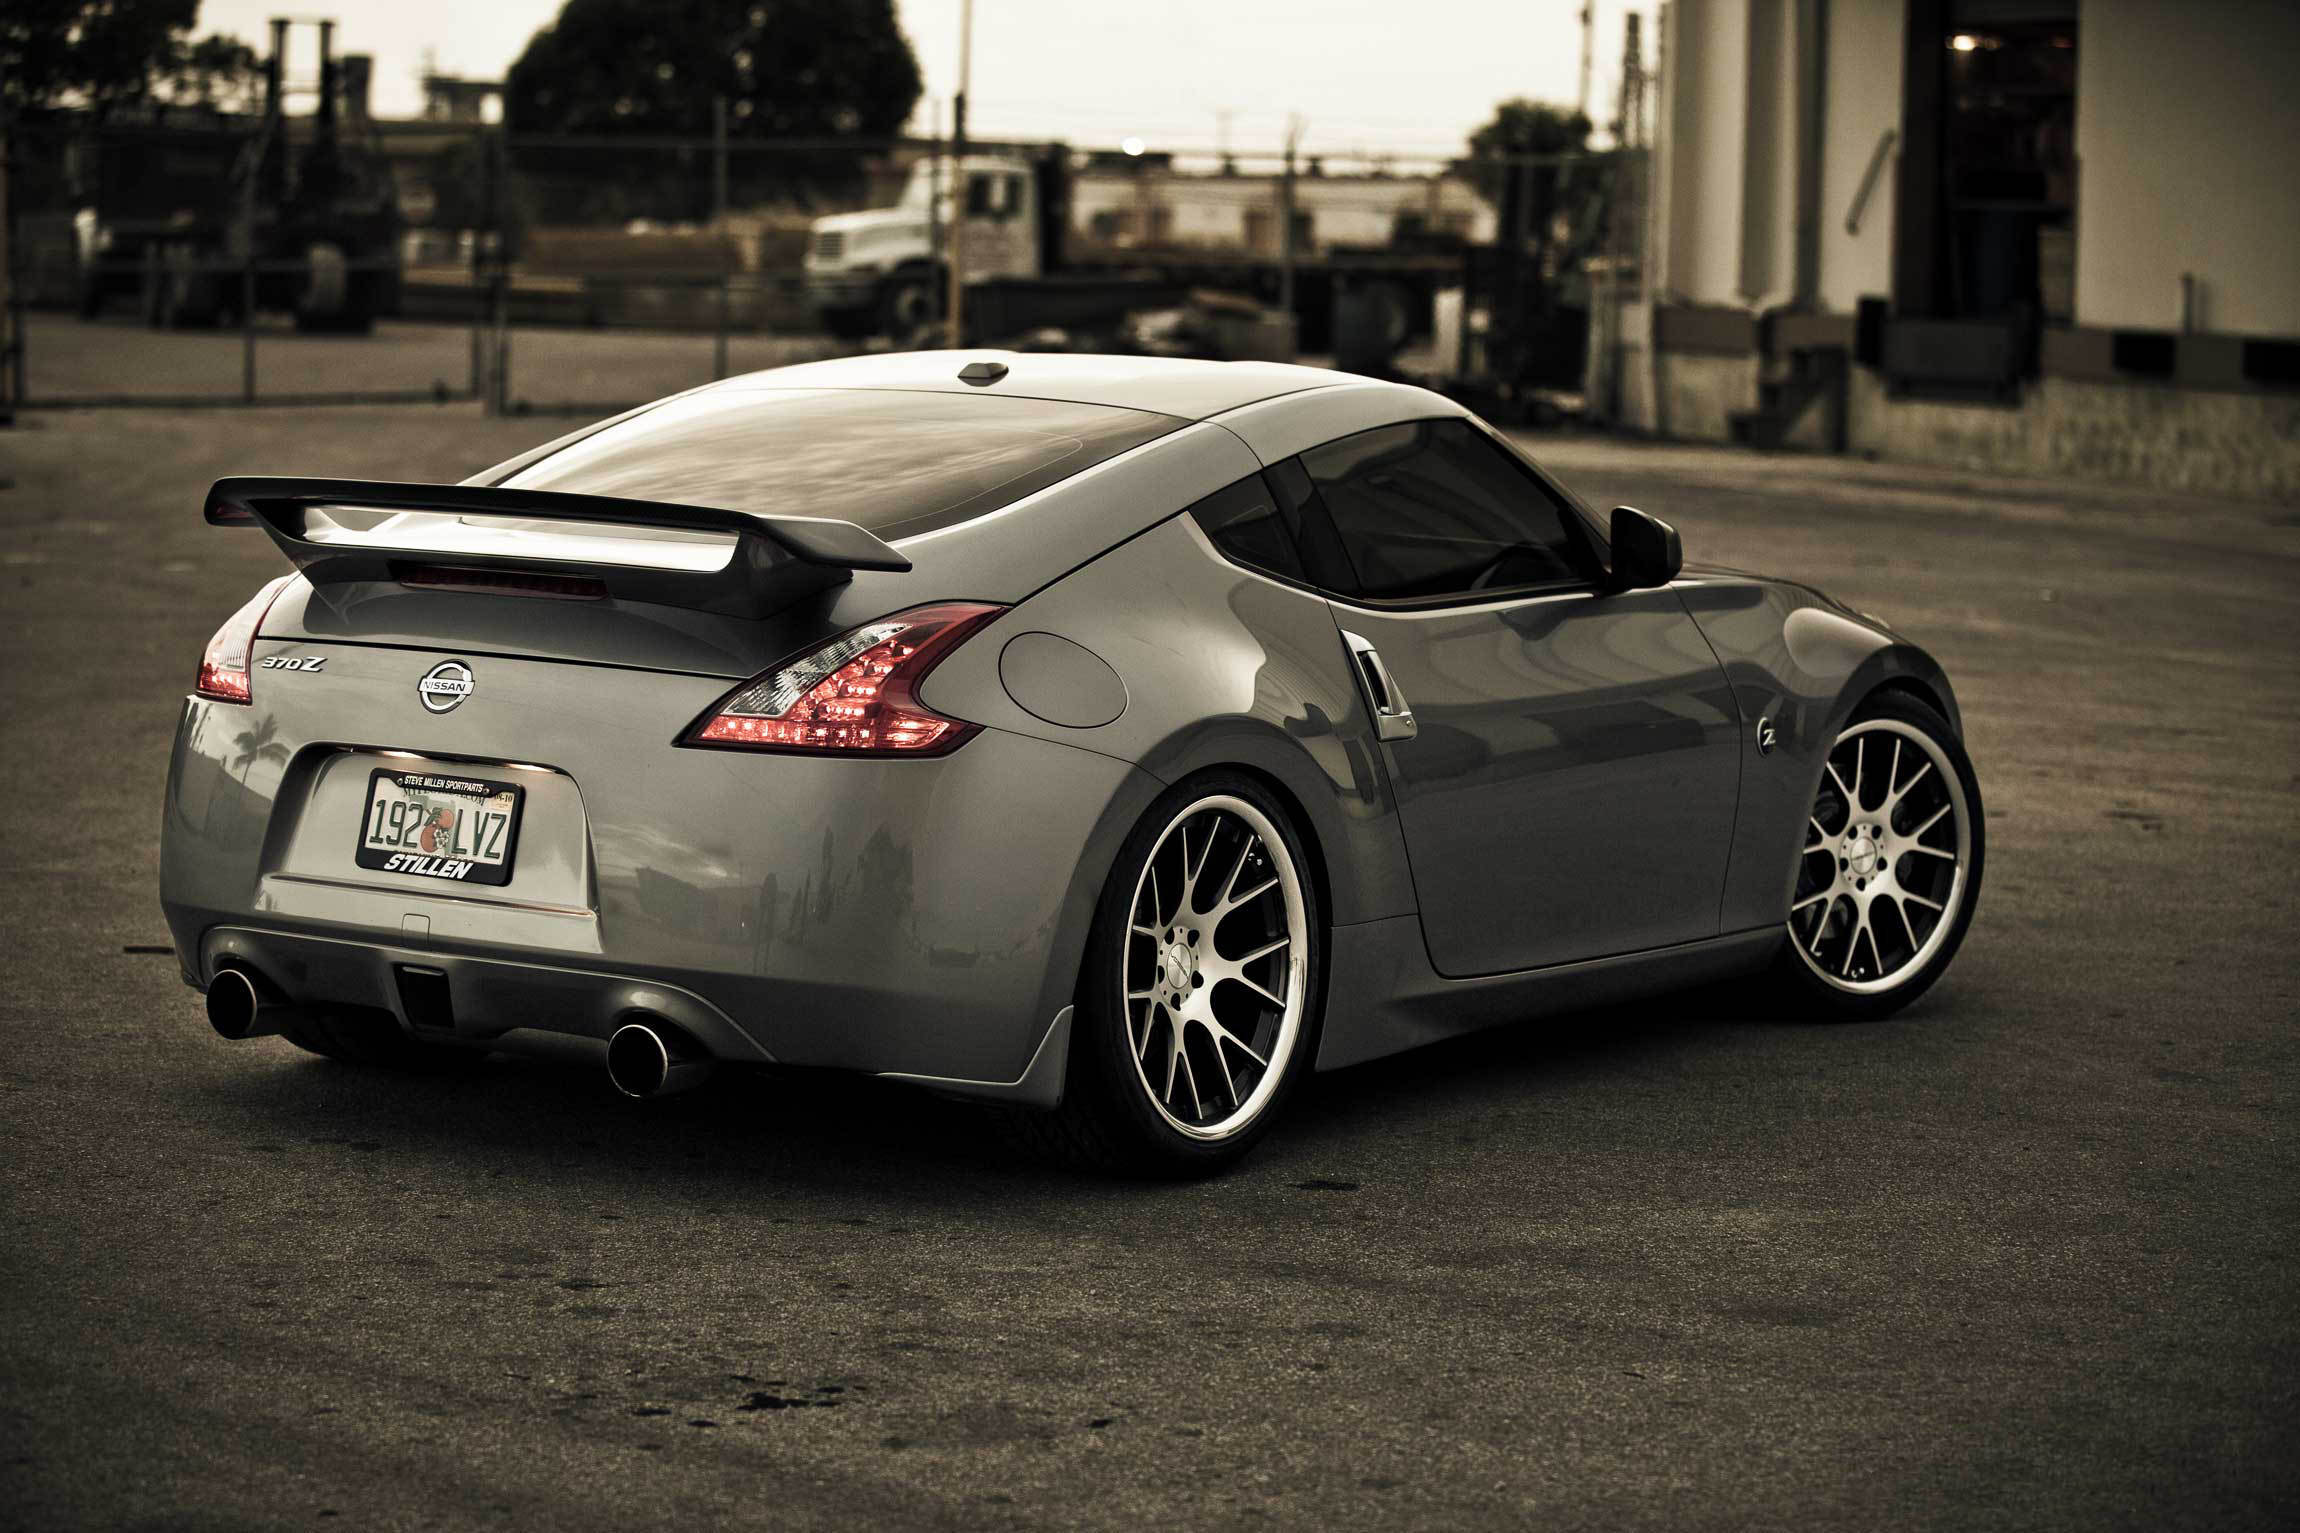 63 Nissan 370Z HD Wallpapers | Backgrounds - Wallpaper Abyss